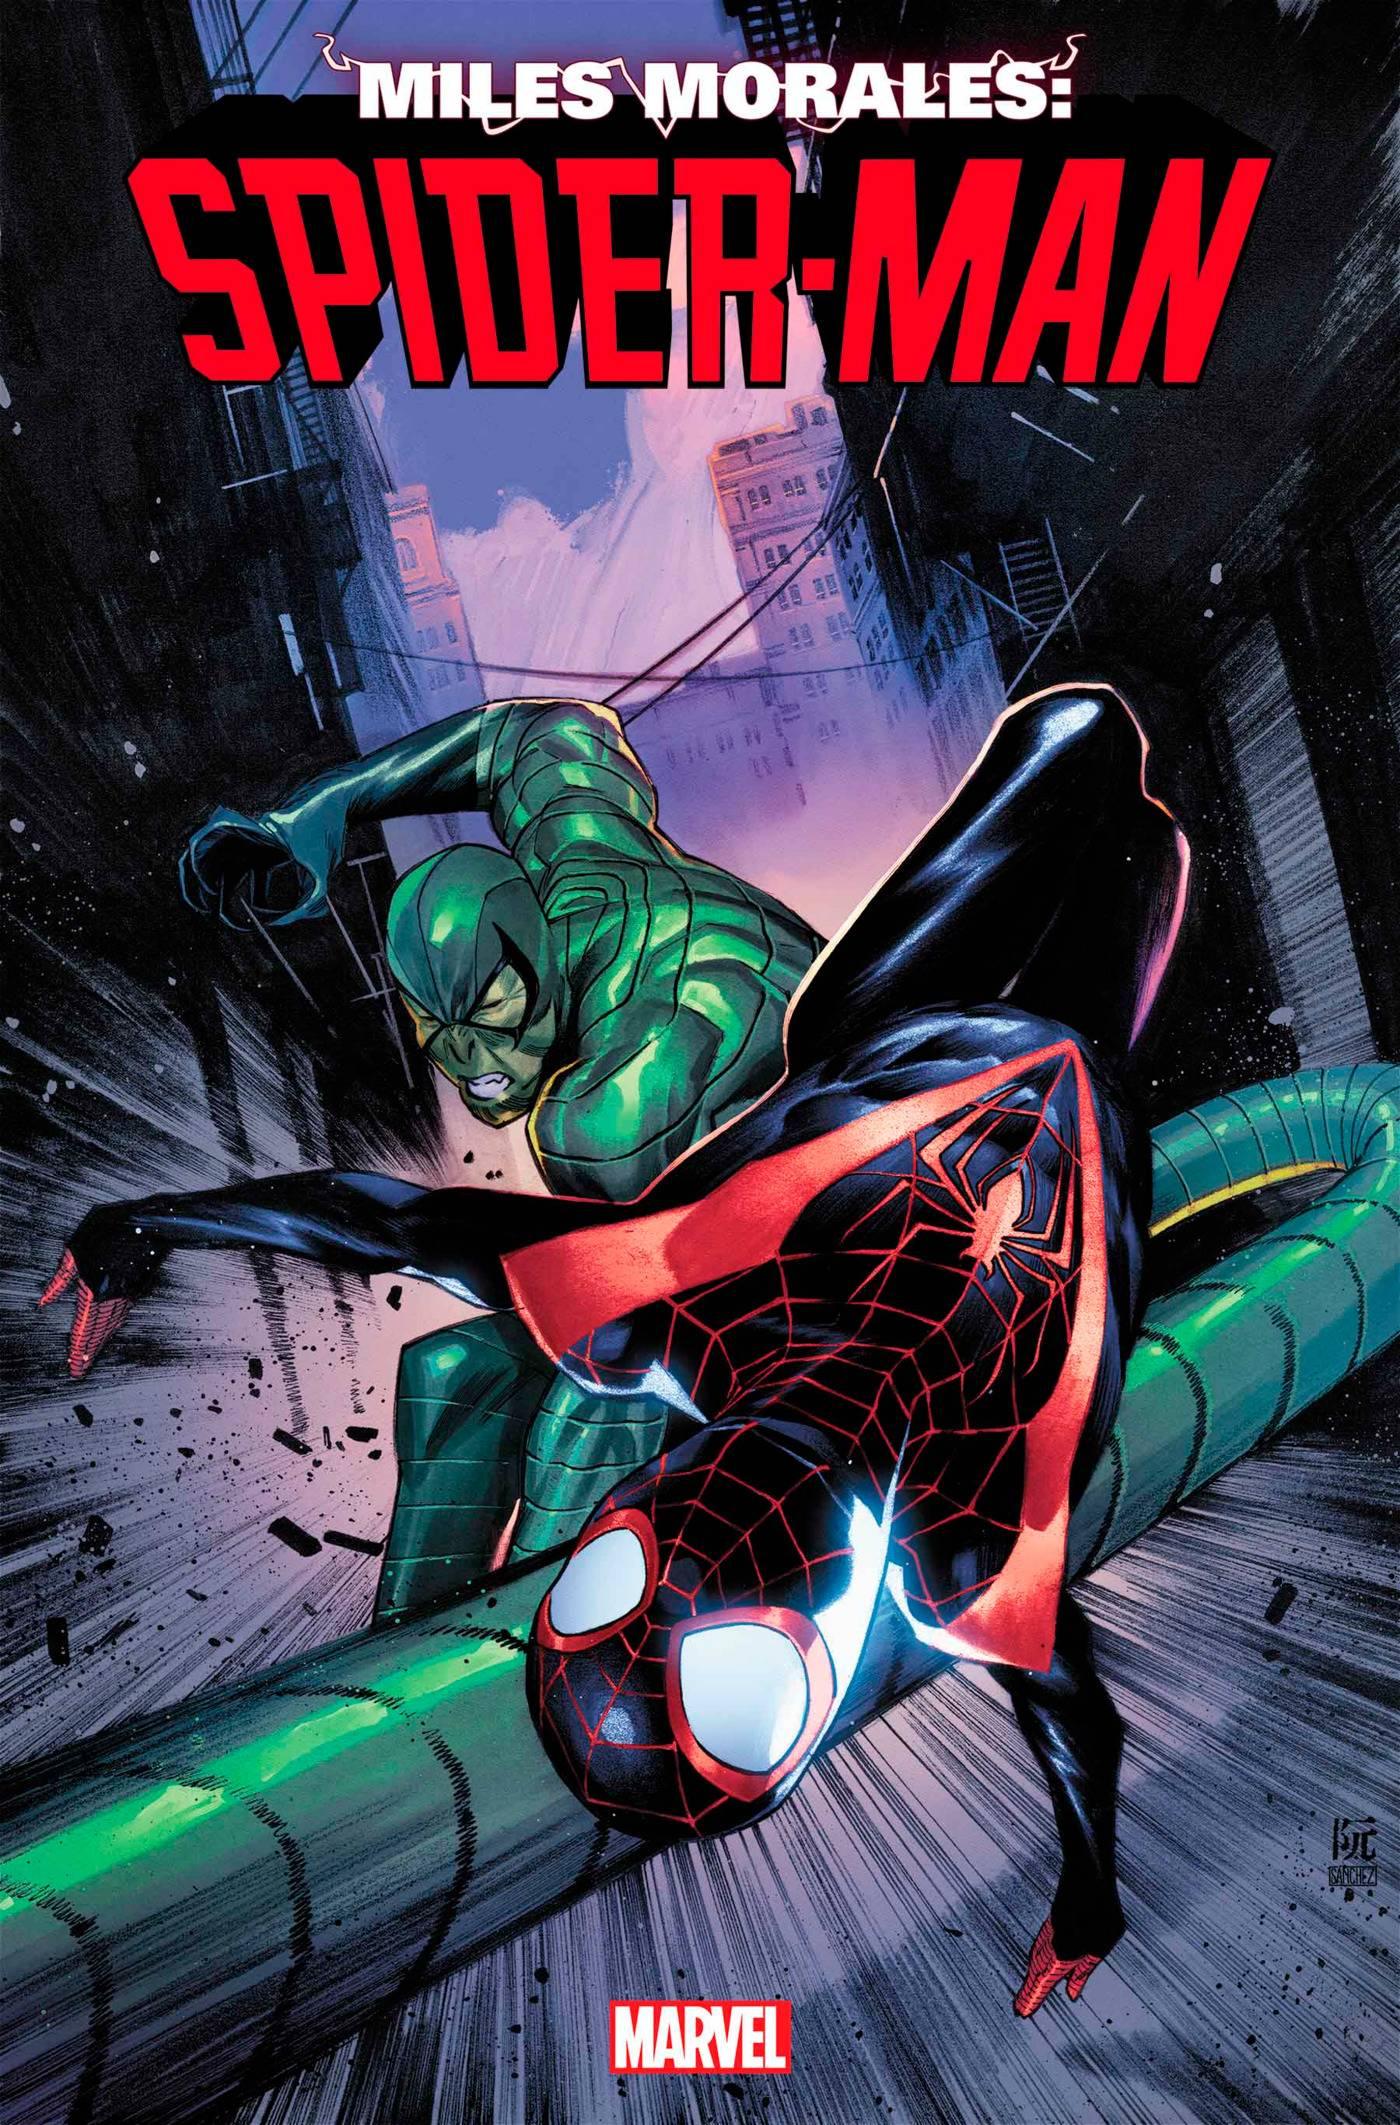 MILES MORALES SPIDER-MAN #2 - HolyGrail Comix